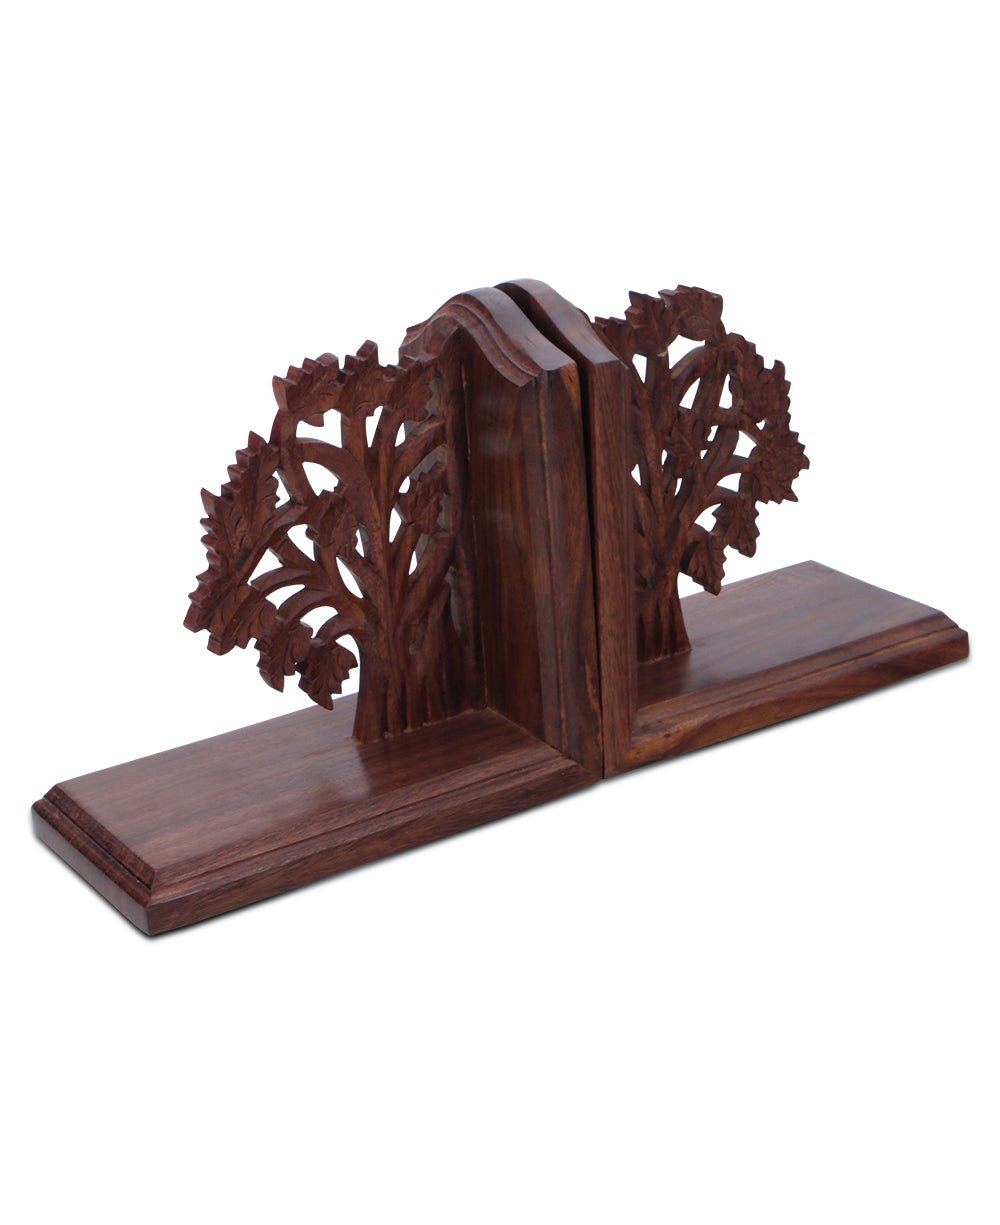 Fairtrade Tree of Life Indian Rosewood Bookends, Handmade - Bookends